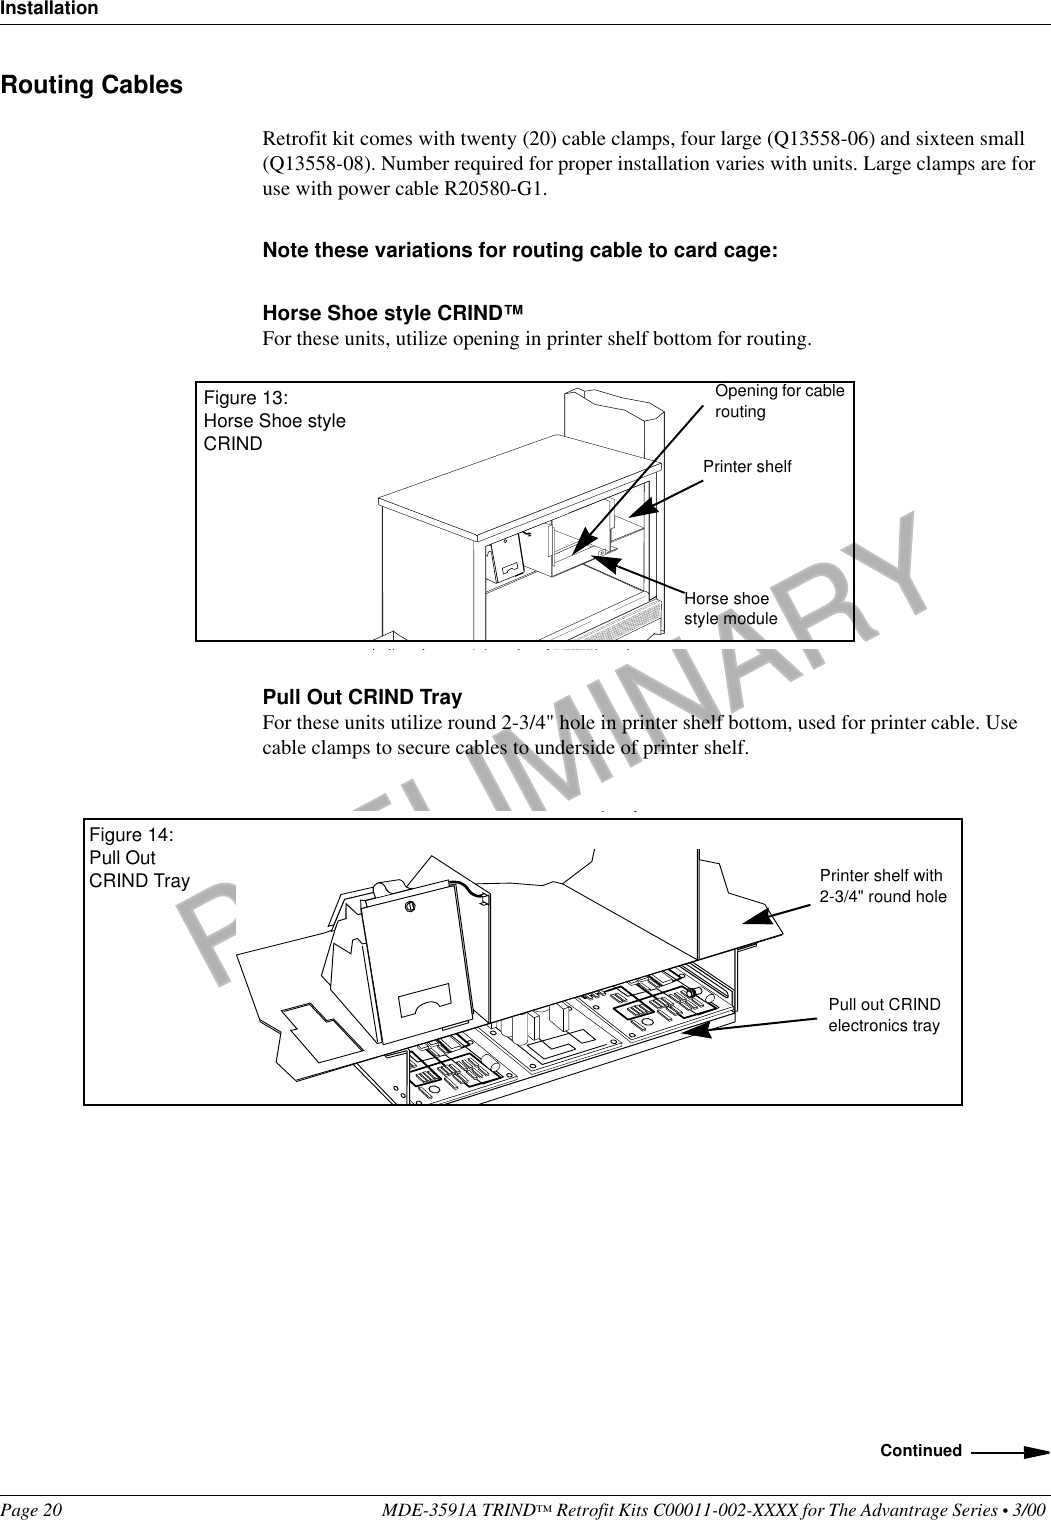 PRELIMINARYInstallationPage 20 MDE-3591A TRIND™ Retrofit Kits C00011-002-XXXX for The Advantrage Series • 3/00 Routing CablesRetrofit kit comes with twenty (20) cable clamps, four large (Q13558-06) and sixteen small (Q13558-08). Number required for proper installation varies with units. Large clamps are for use with power cable R20580-G1.Note these variations for routing cable to card cage:Horse Shoe style CRIND™For these units, utilize opening in printer shelf bottom for routing.Pull Out CRIND TrayFor these units utilize round 2-3/4&quot; hole in printer shelf bottom, used for printer cable. Use cable clamps to secure cables to underside of printer shelf.Figure 13:Horse Shoe style CRINDPrinter shelfHorse shoe style moduleOpening for cable routingPrinter shelf with 2-3/4&quot; round holePull out CRIND electronics trayFigure 14:Pull Out CRIND TrayContinued